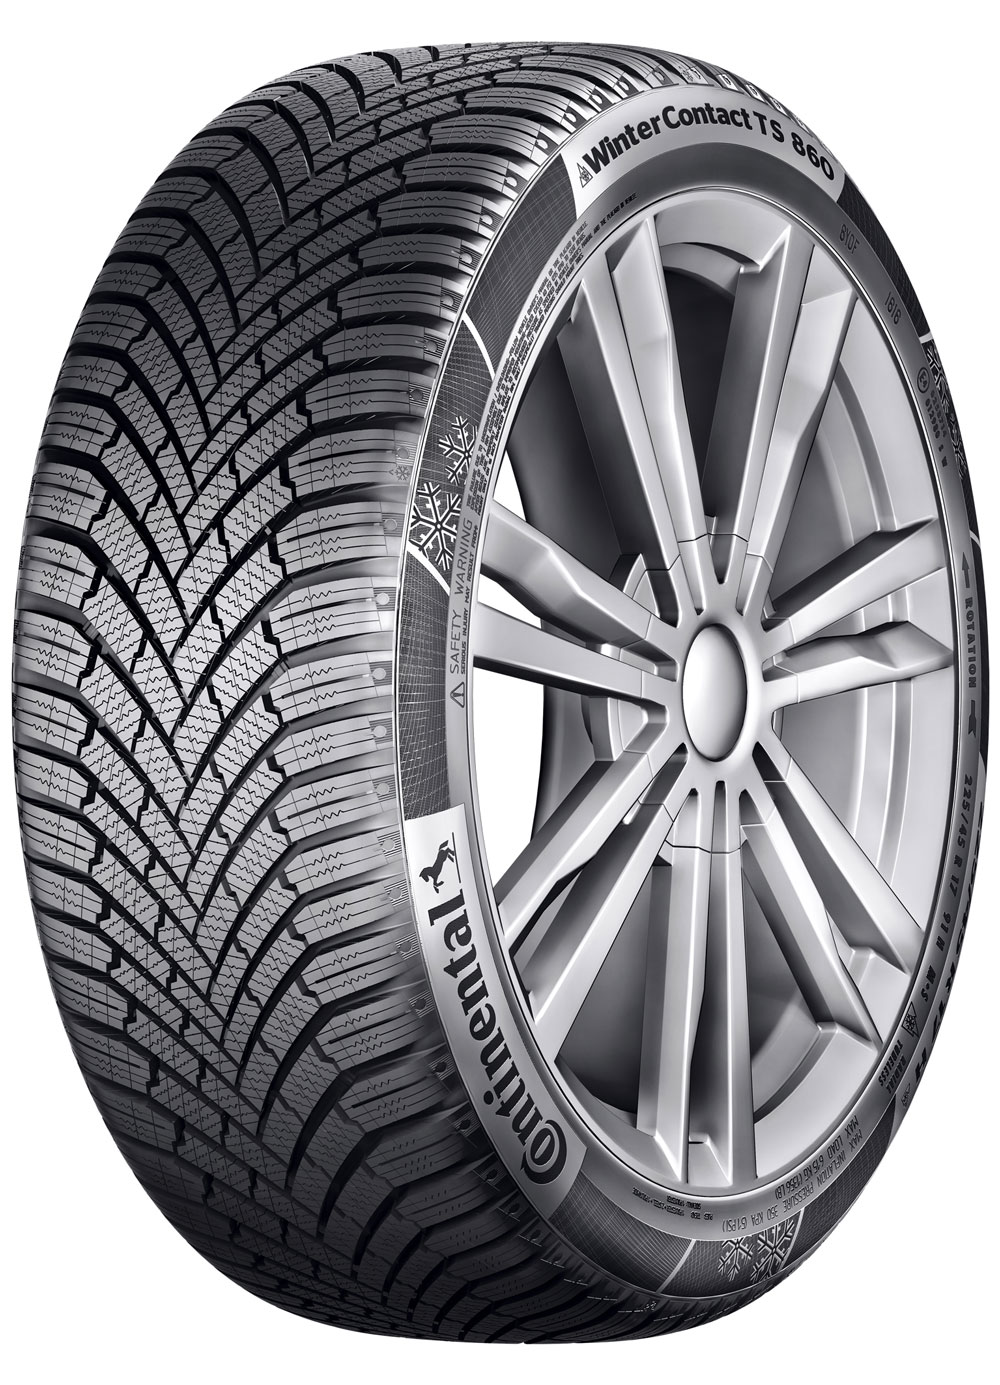 Gomme Nuove Continental 235/45 R18 94V TS-870P FR M+S pneumatici nuovi Invernale